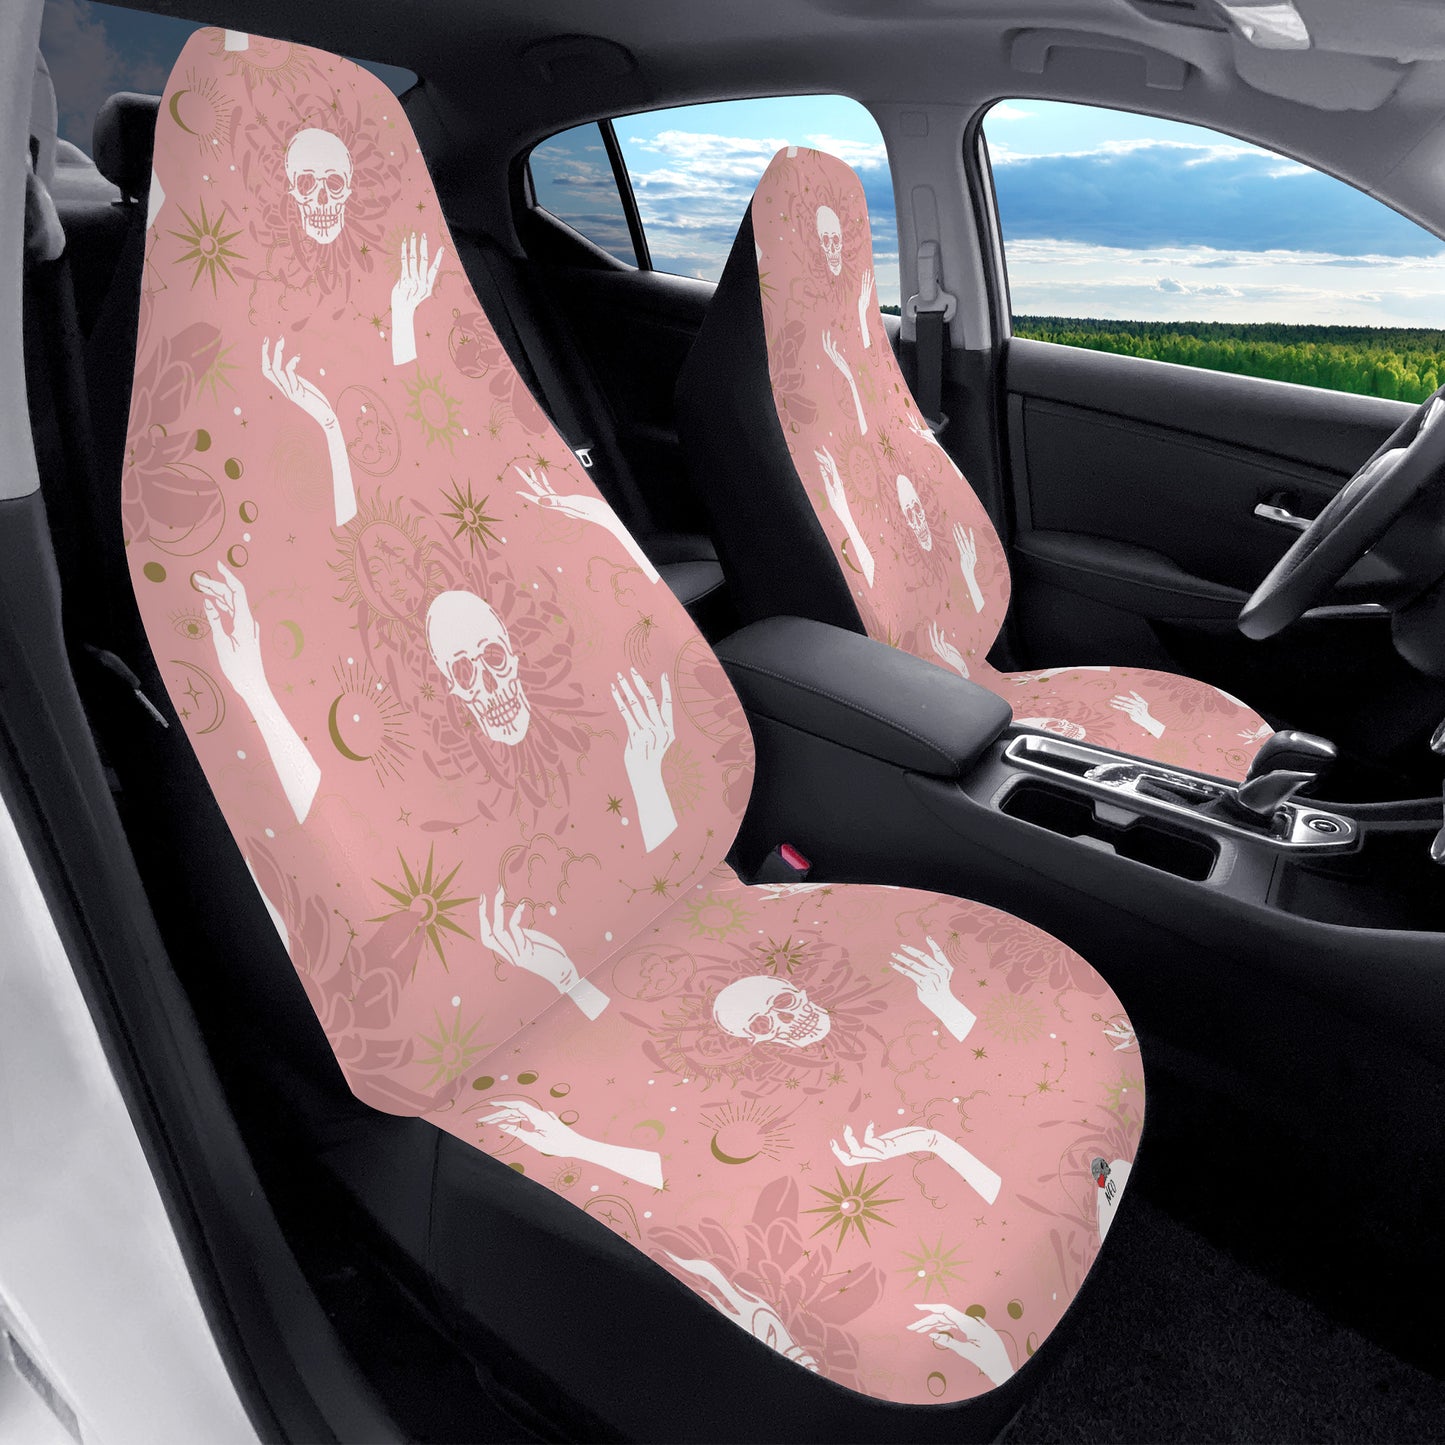 Gentle Hands Car Seat Covers